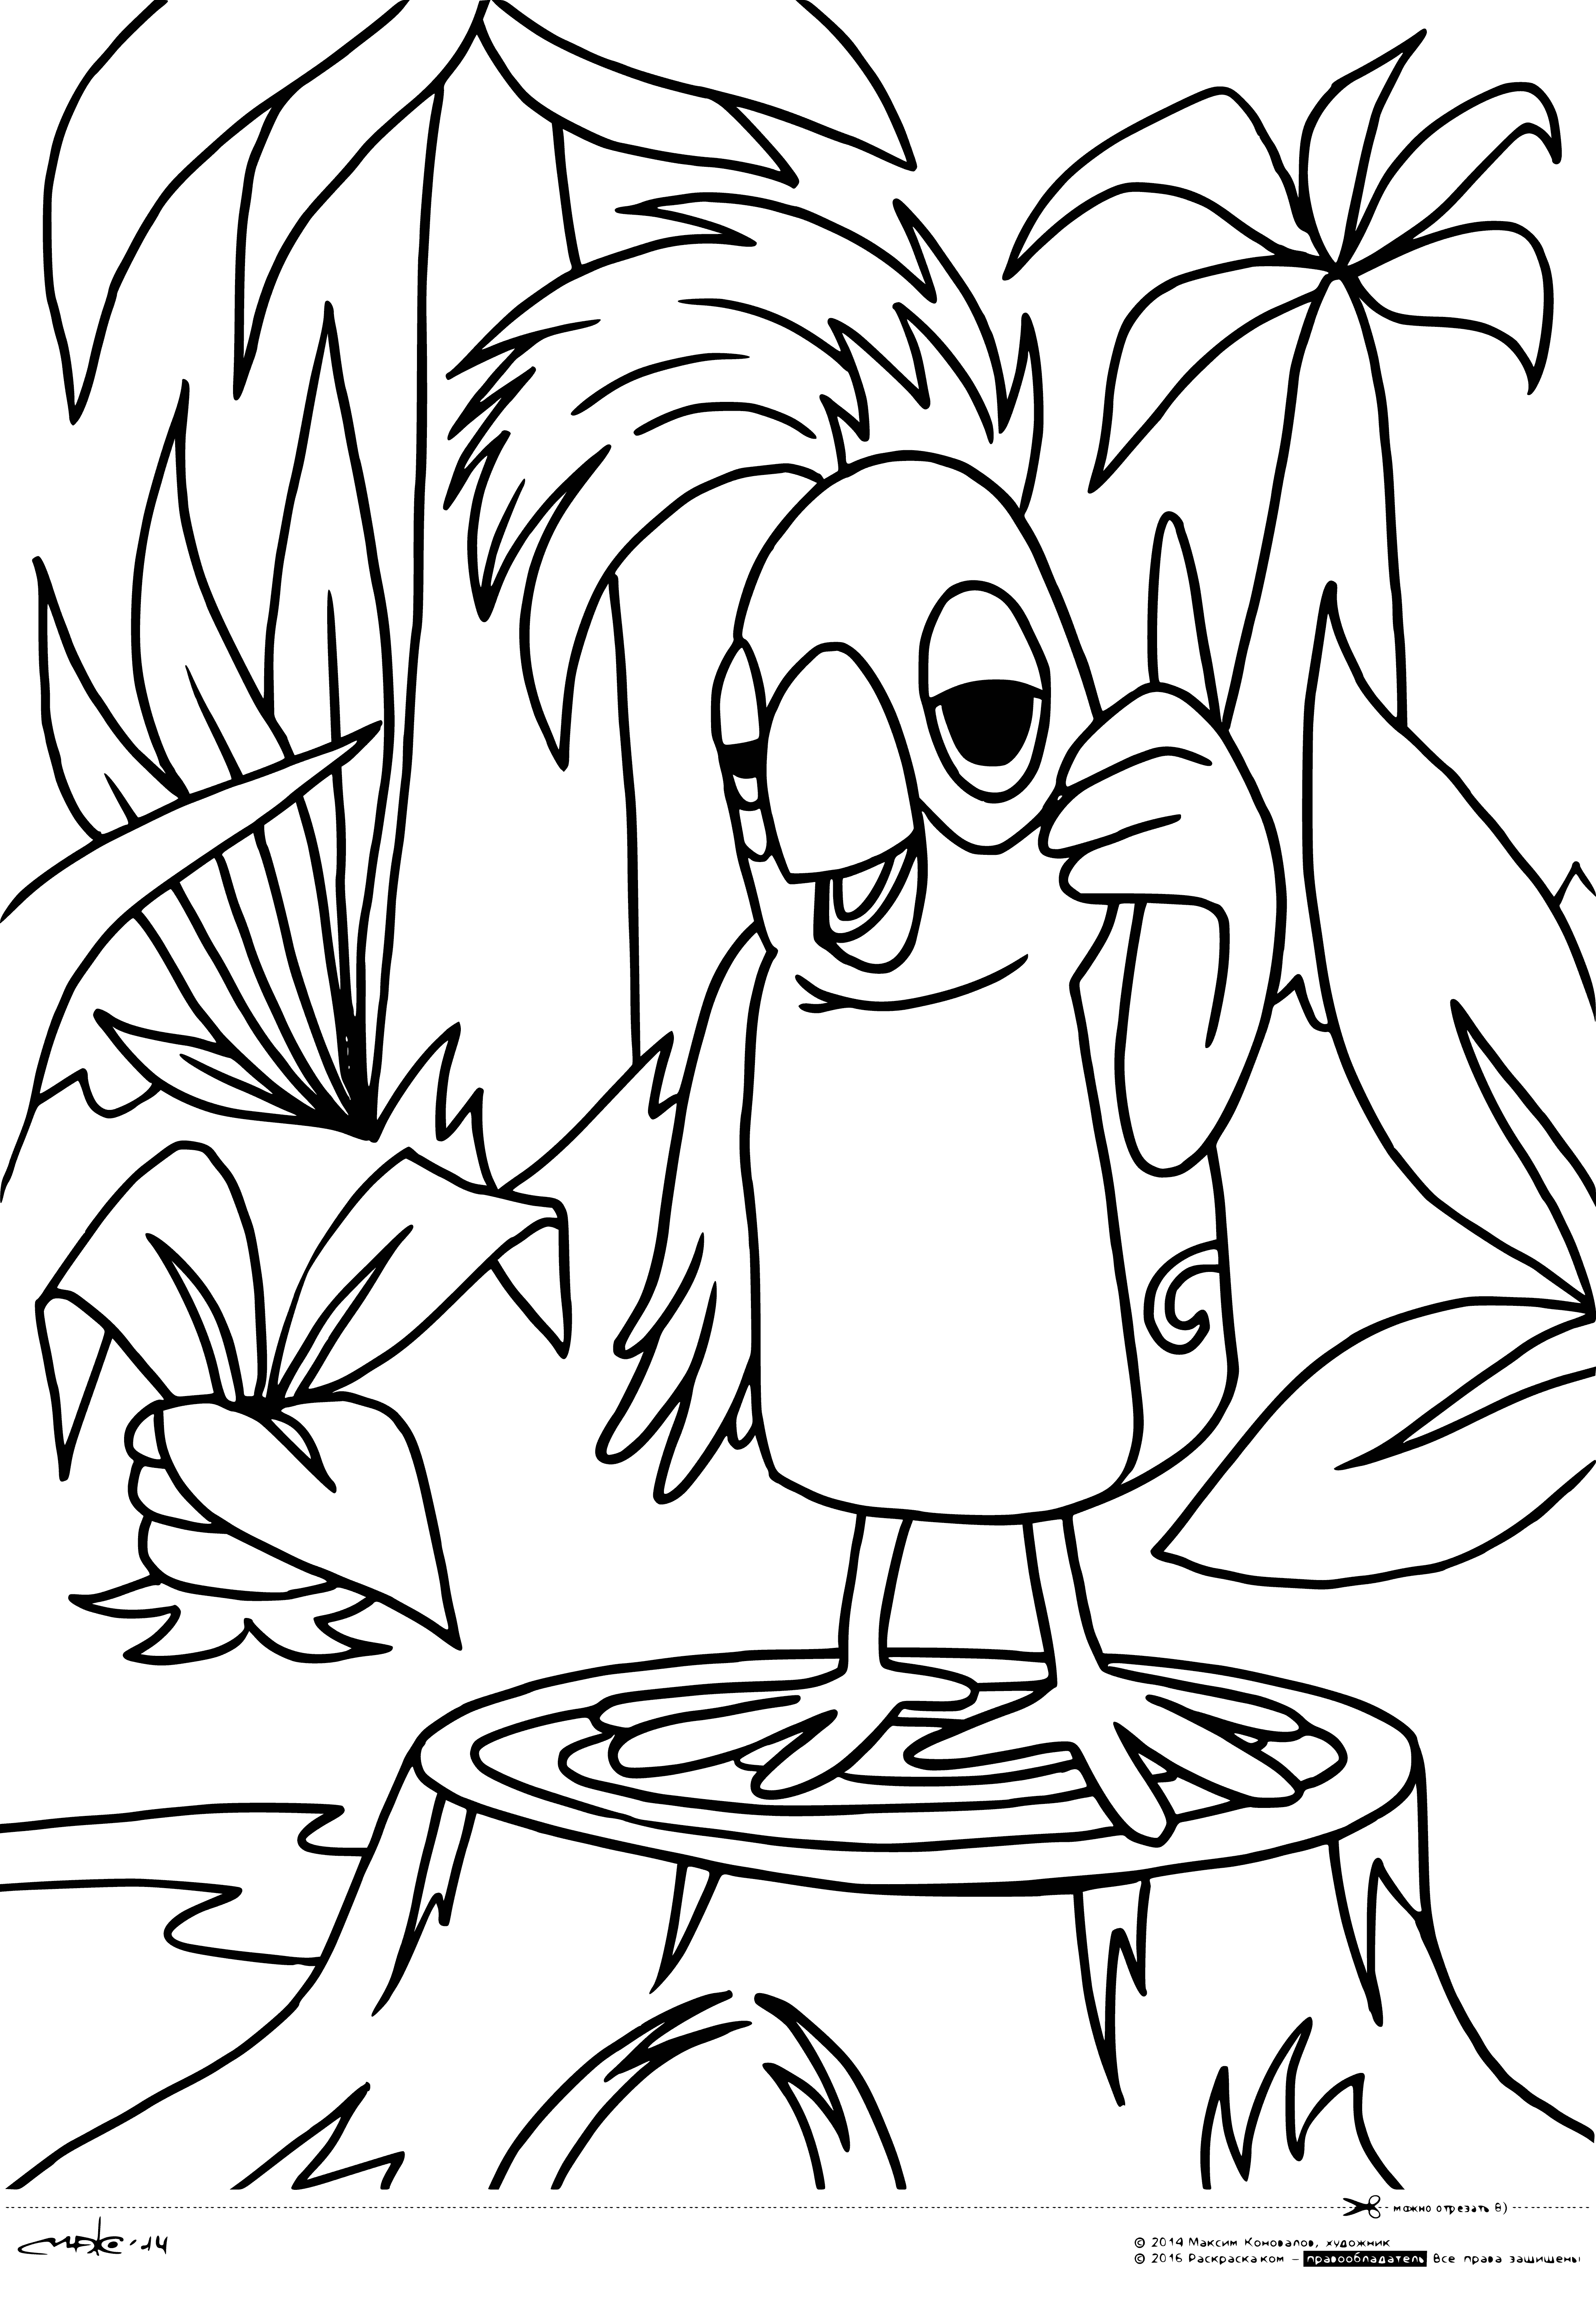 coloring page: 38 parrots of various colors & patterns pose in a rainforest, eating seeds, preening feathers. Ranging from bright green to orange to blue.